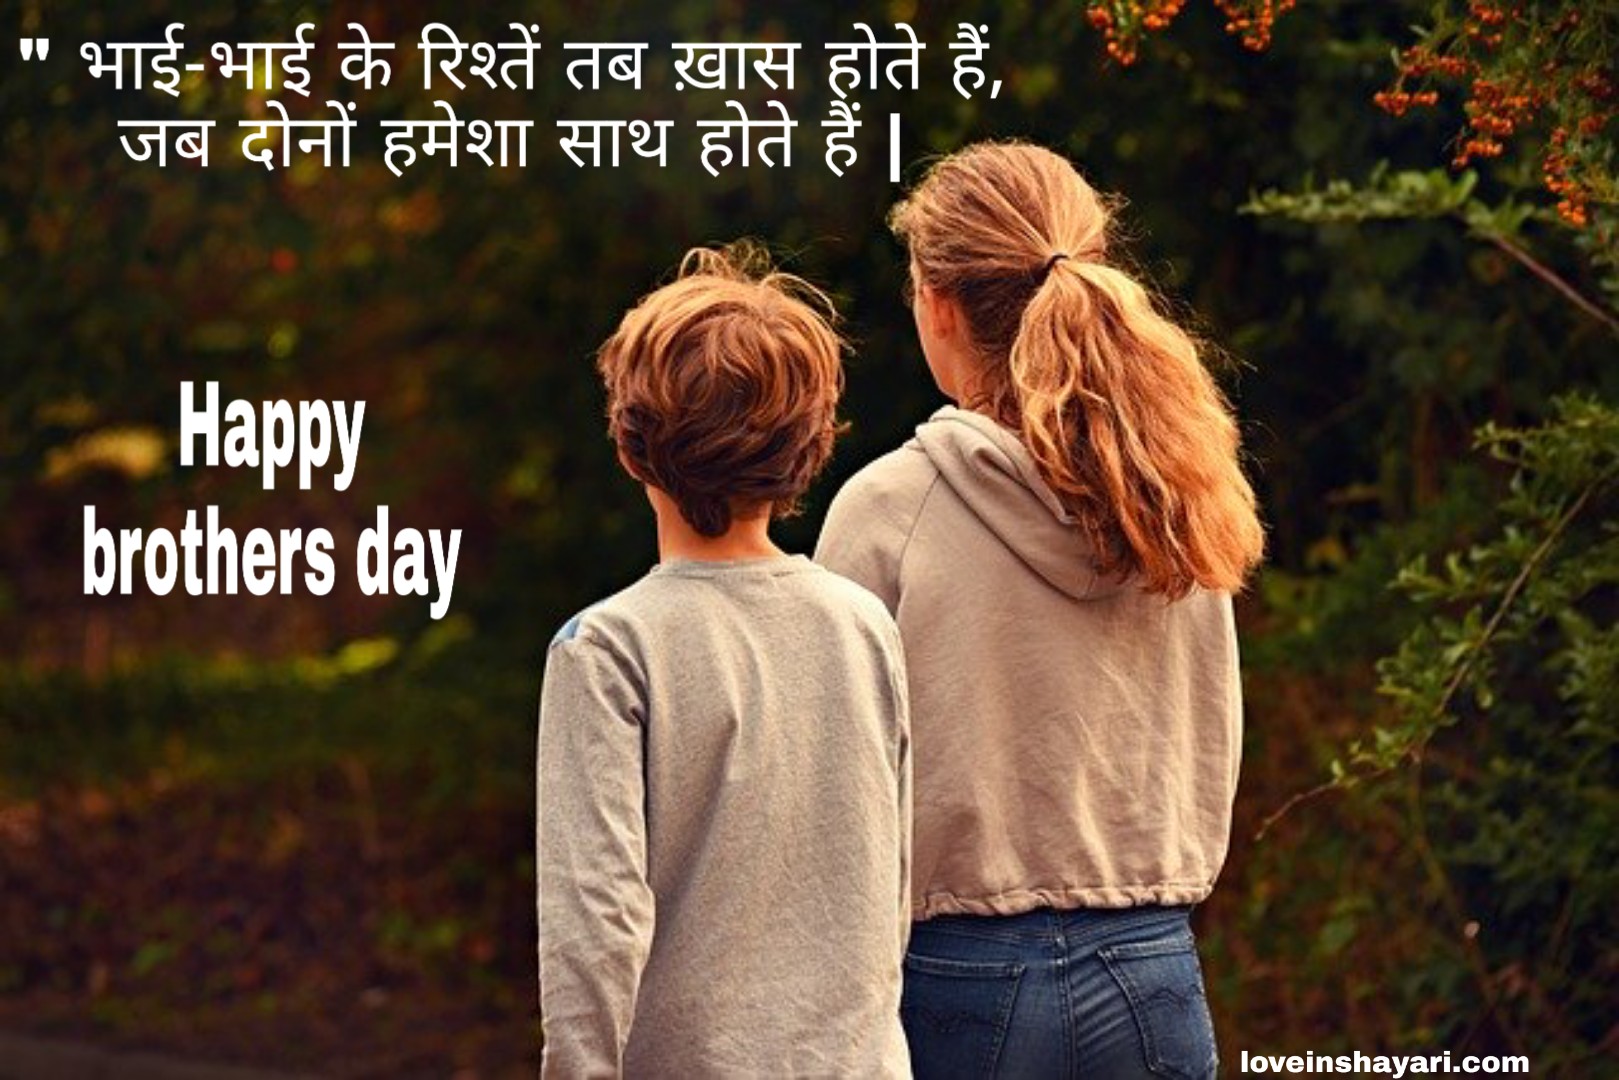 National Brother's Day 2020 Quotes: Beautiful Sayings & Images That  Appreciate Bond of Brotherhood - video Dailymotion